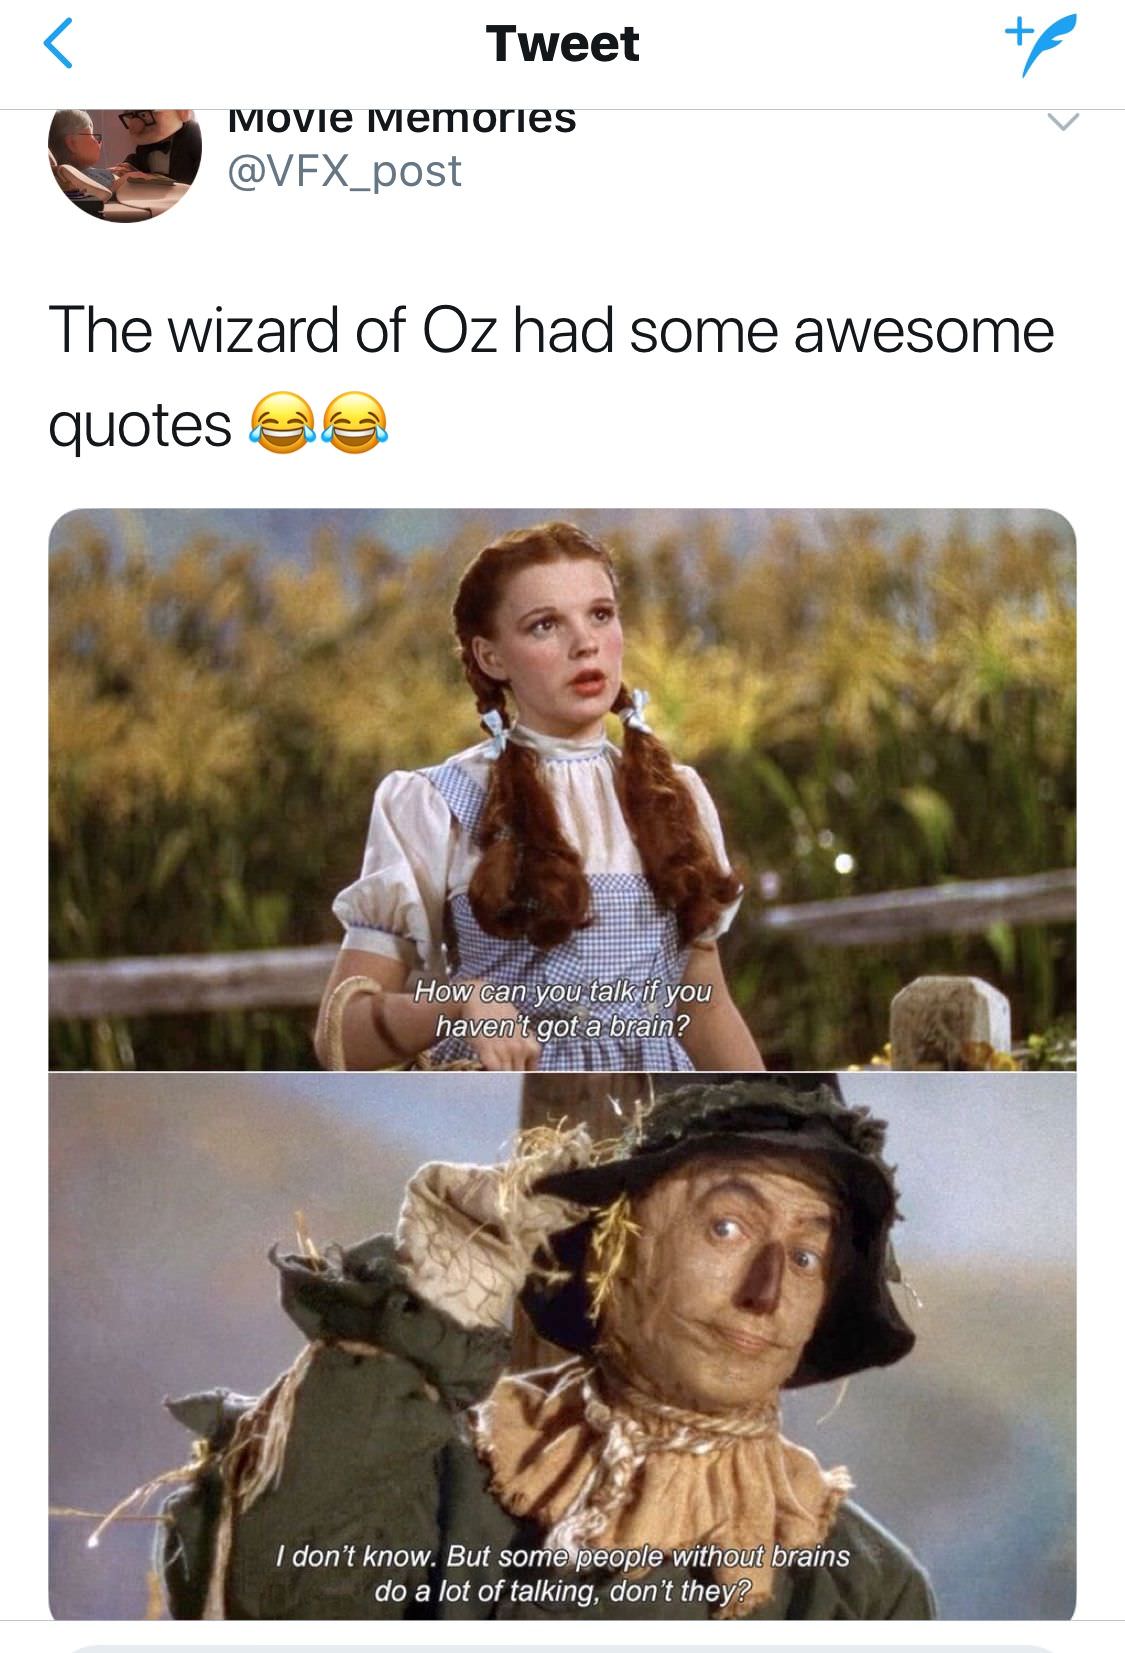 tweet from the Wizard of Oz about people with no brain talking